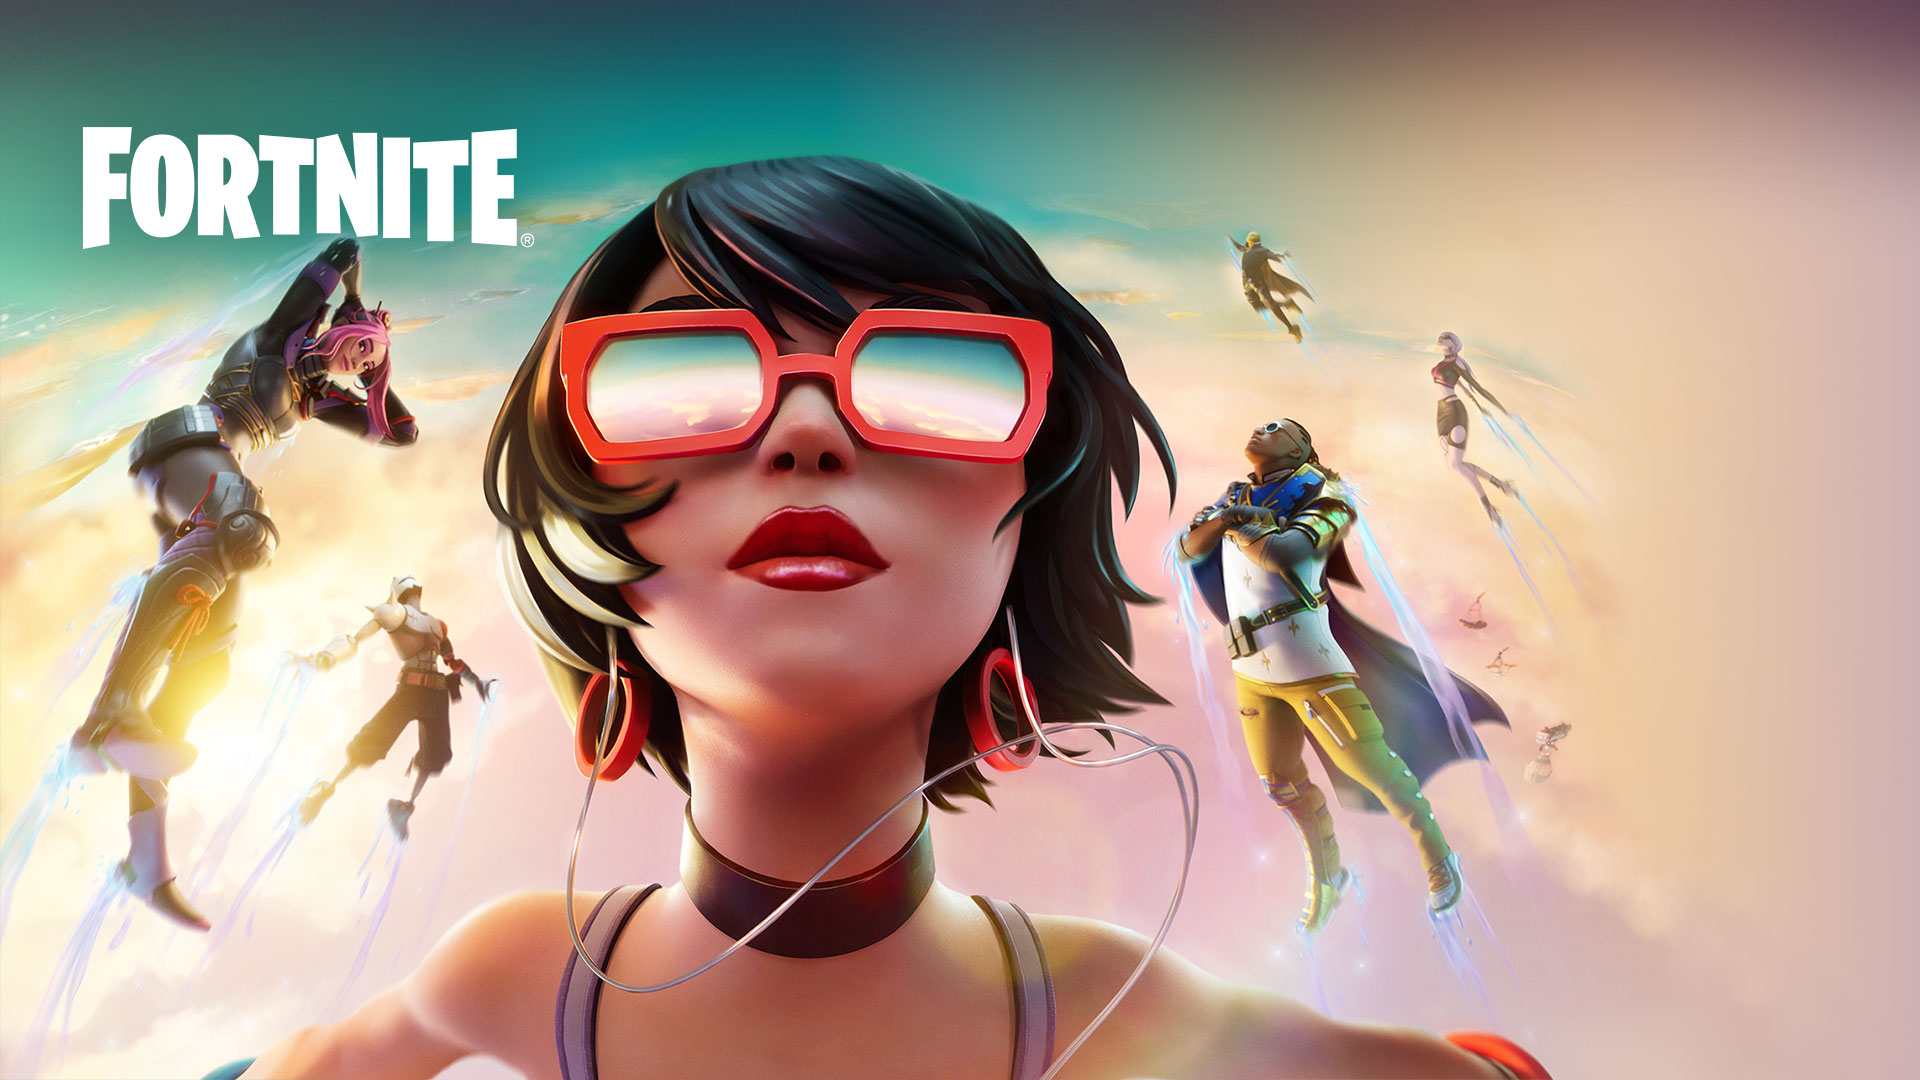 Fortnite, A girl in red sunglasses floats in the clouds with other characters against a pastel-colored sky.